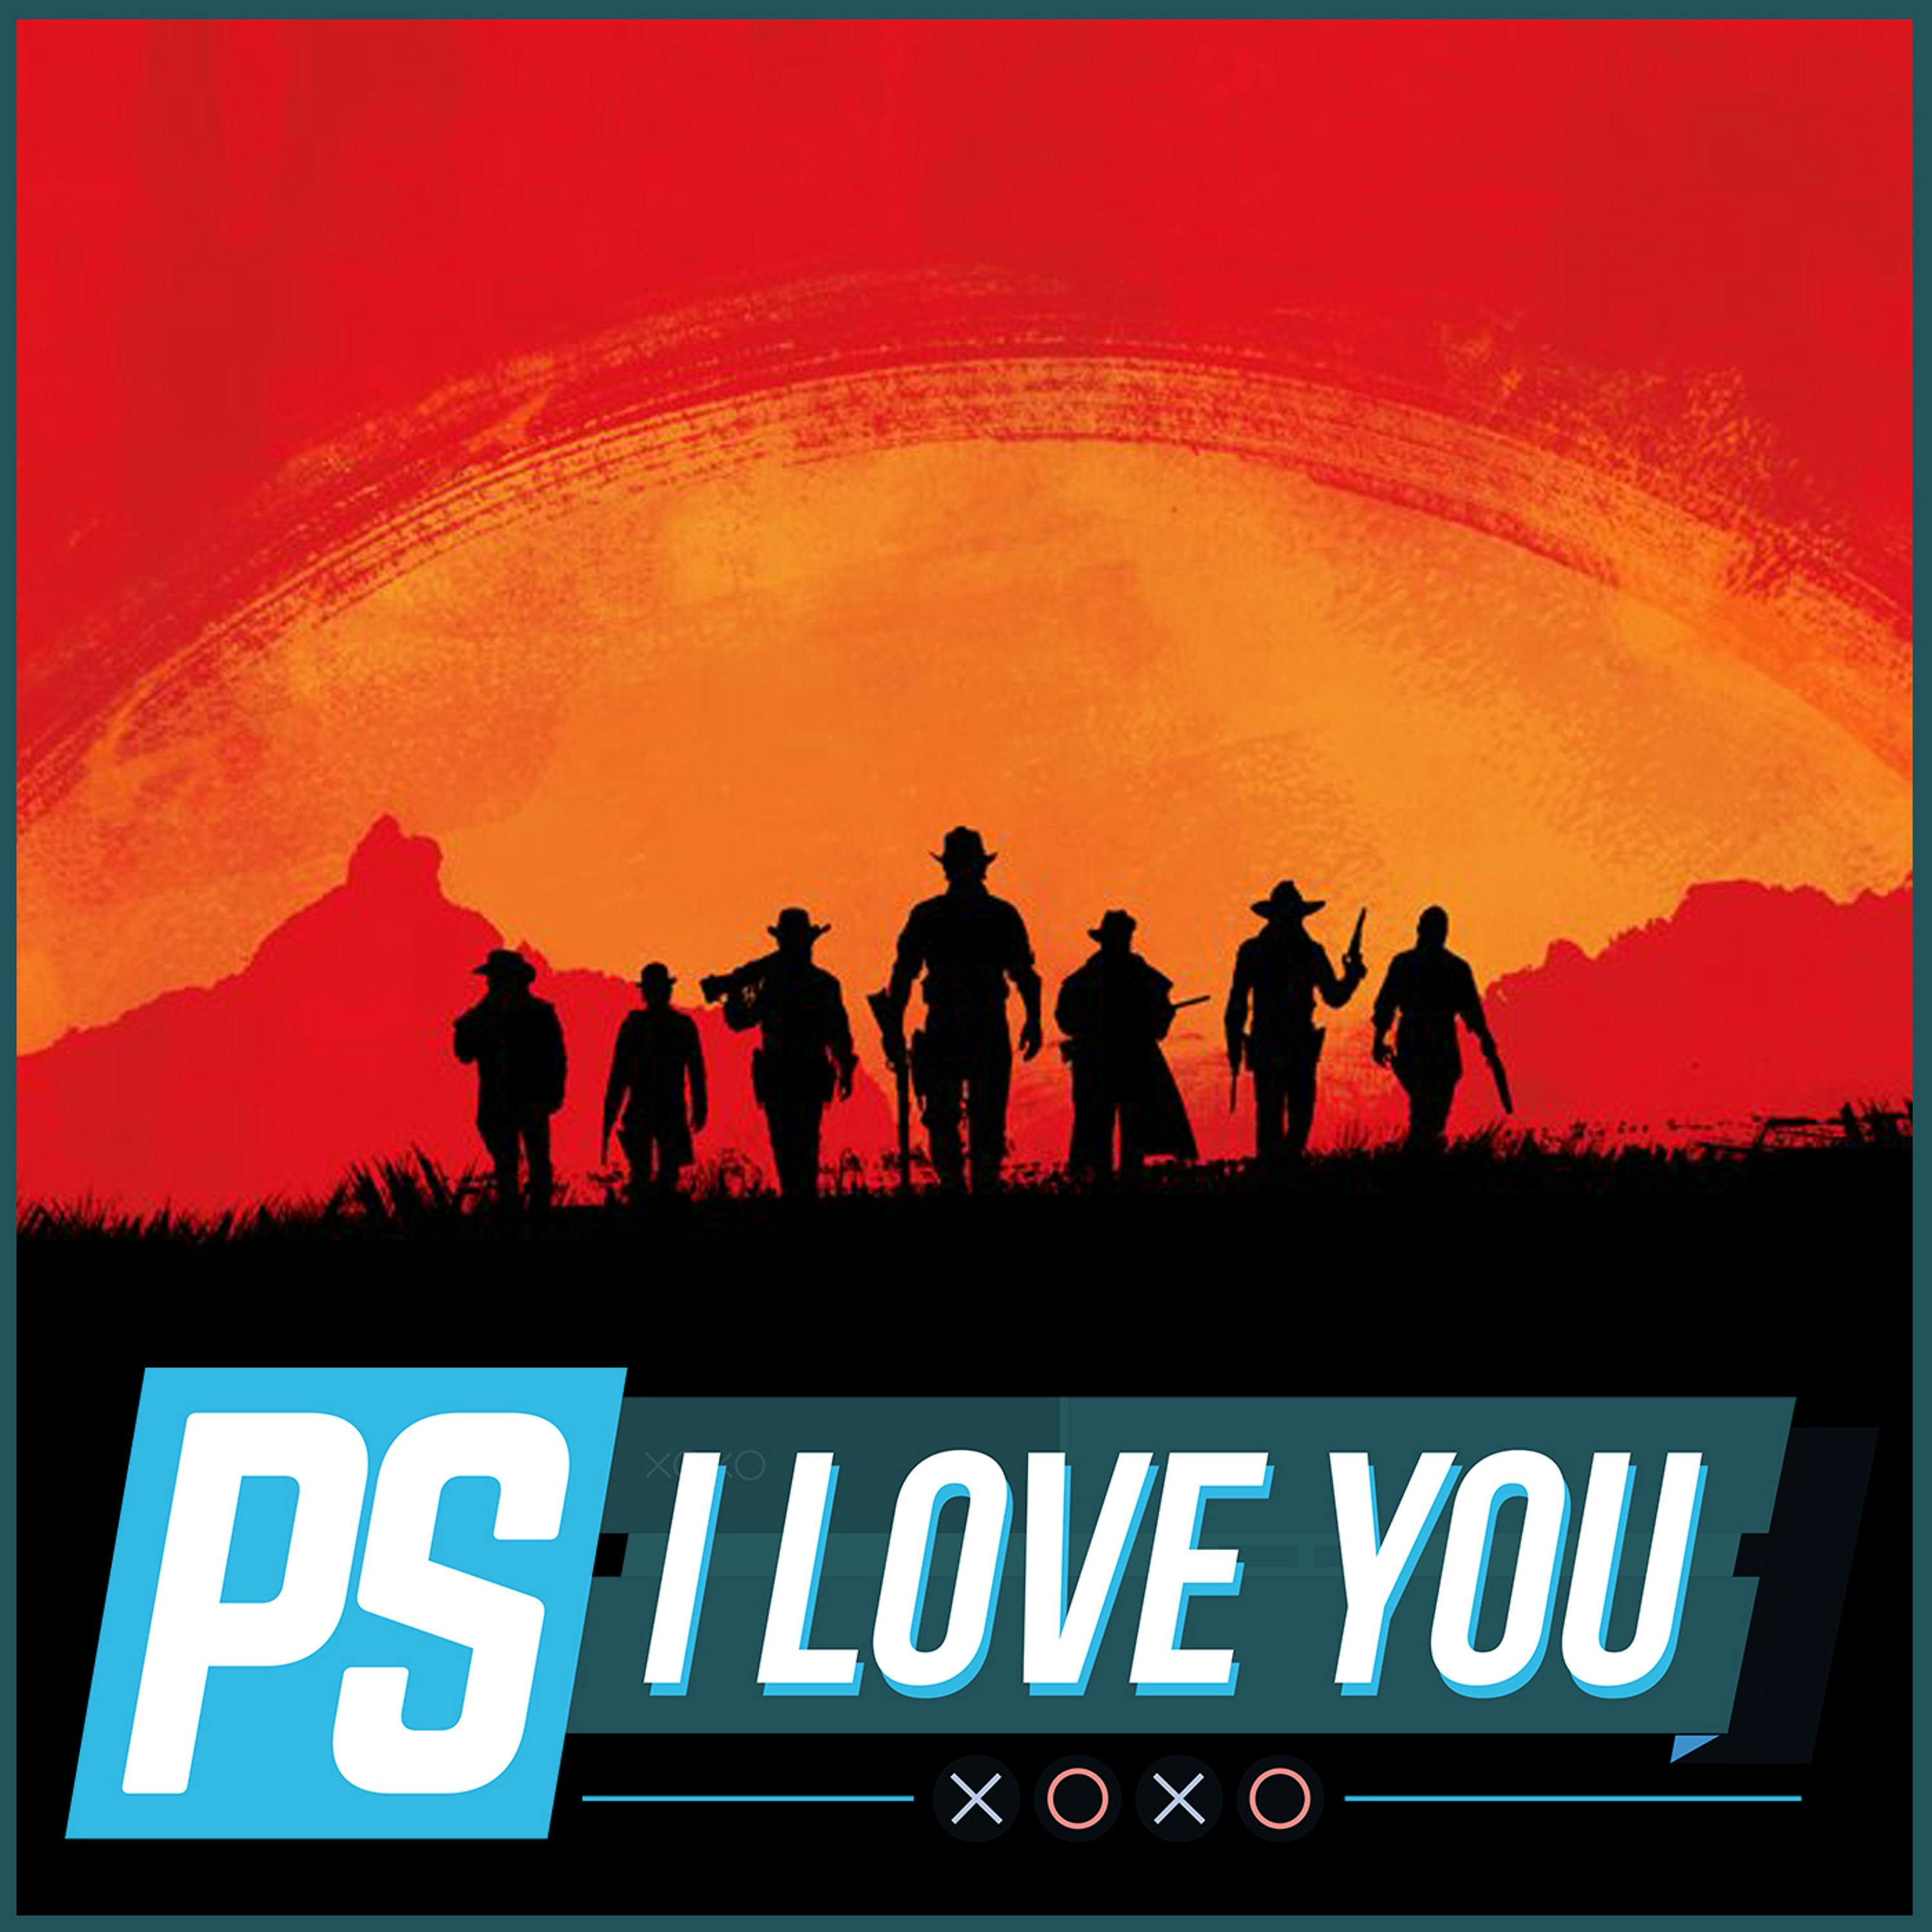 What We Want From Red Dead Redemption 2 - PS I Love You XOXO Ep. 57